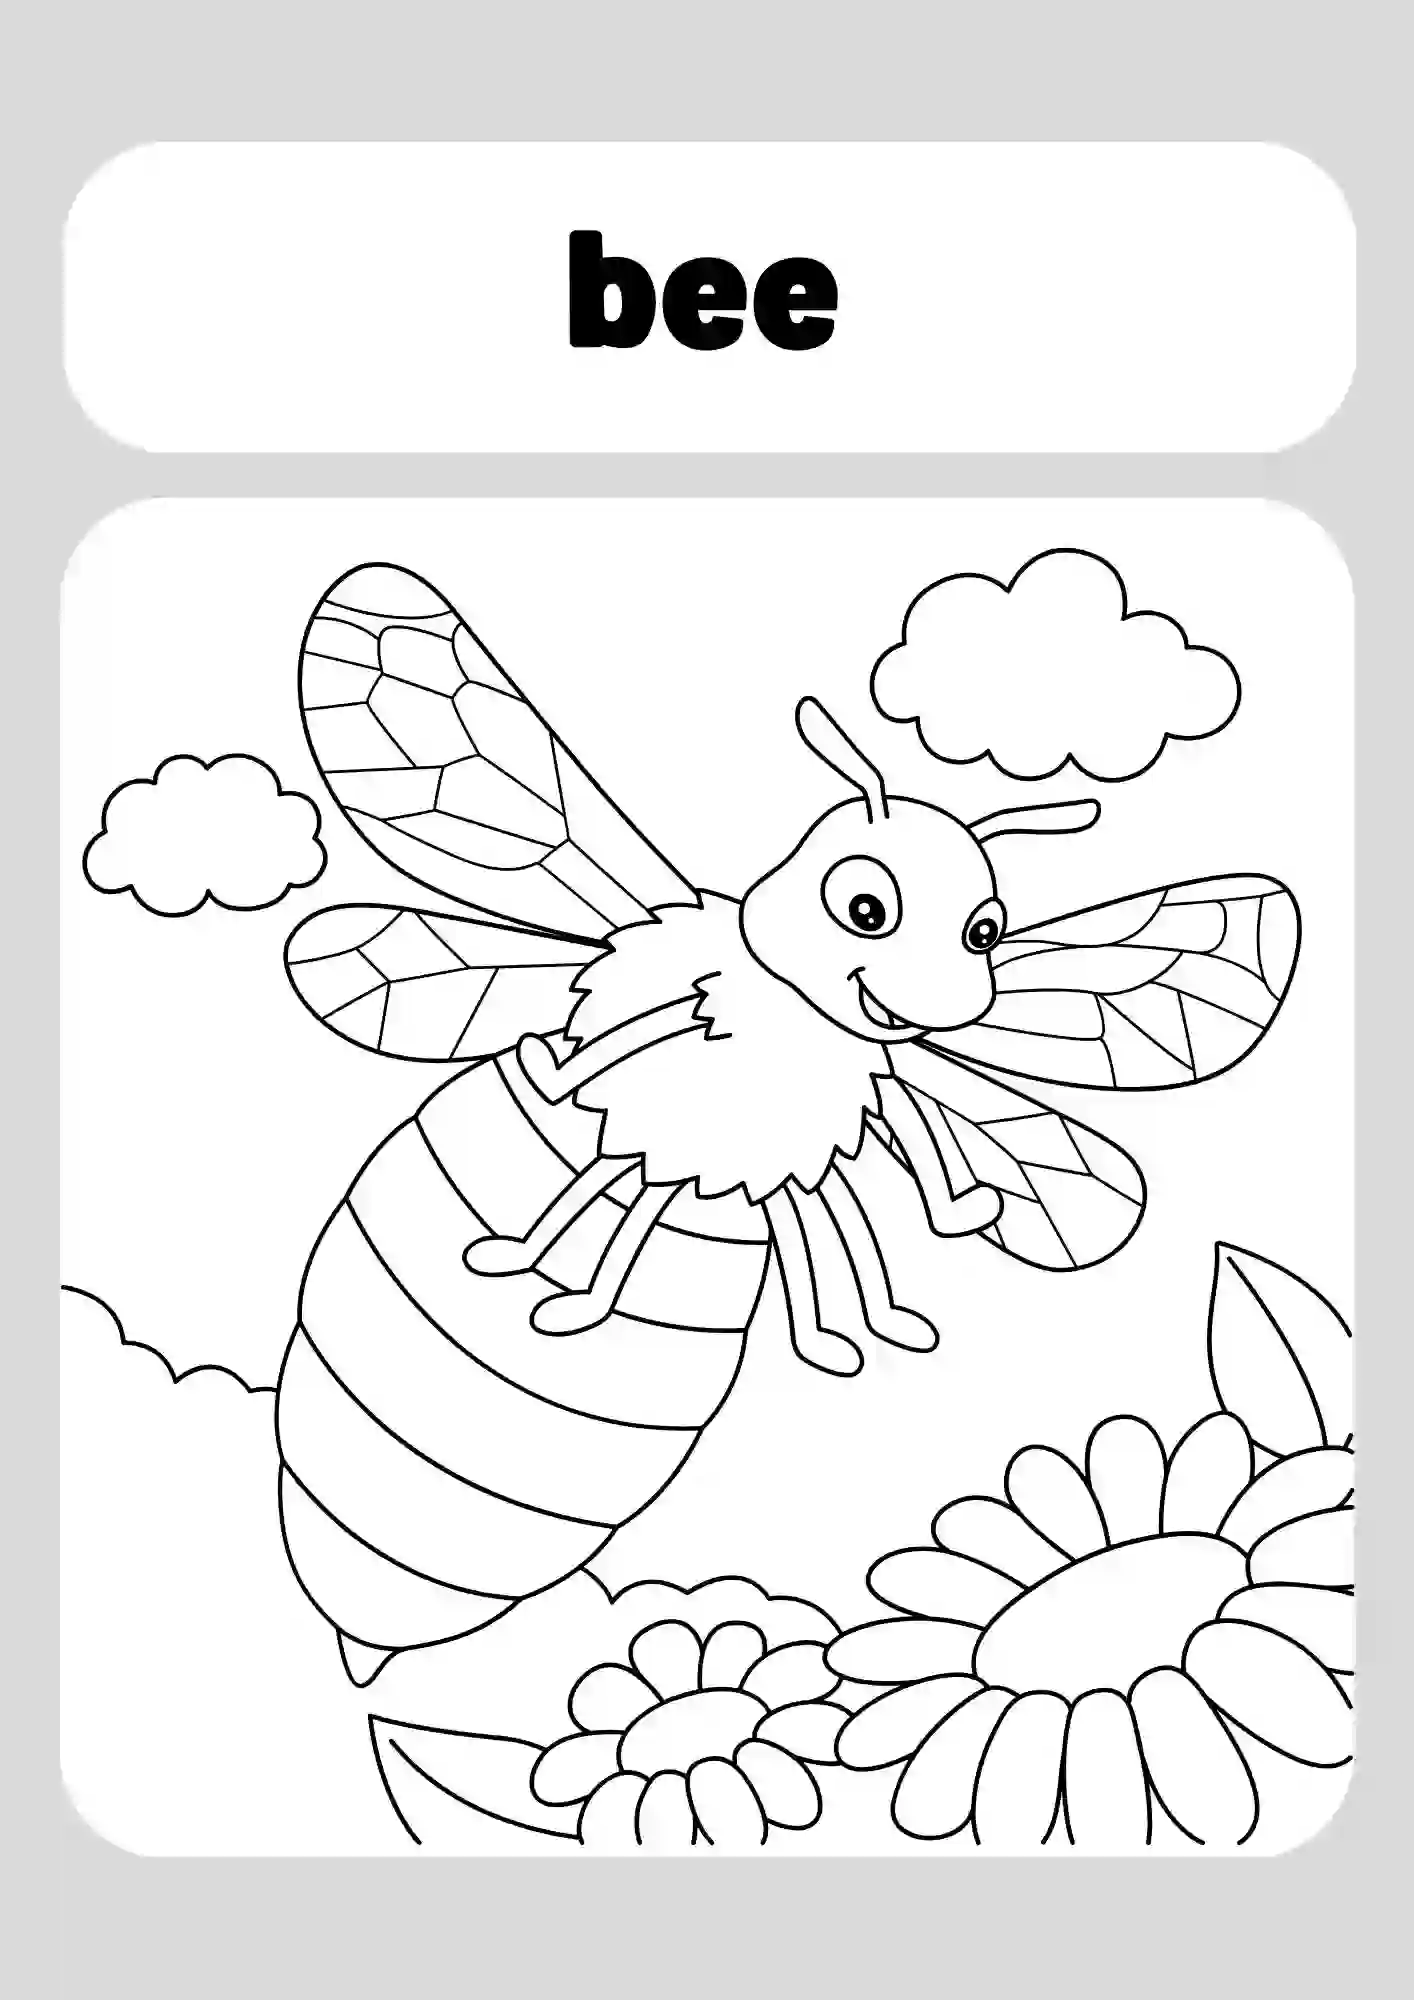 Insects Coloring Worksheets for Kindergarten (bee)